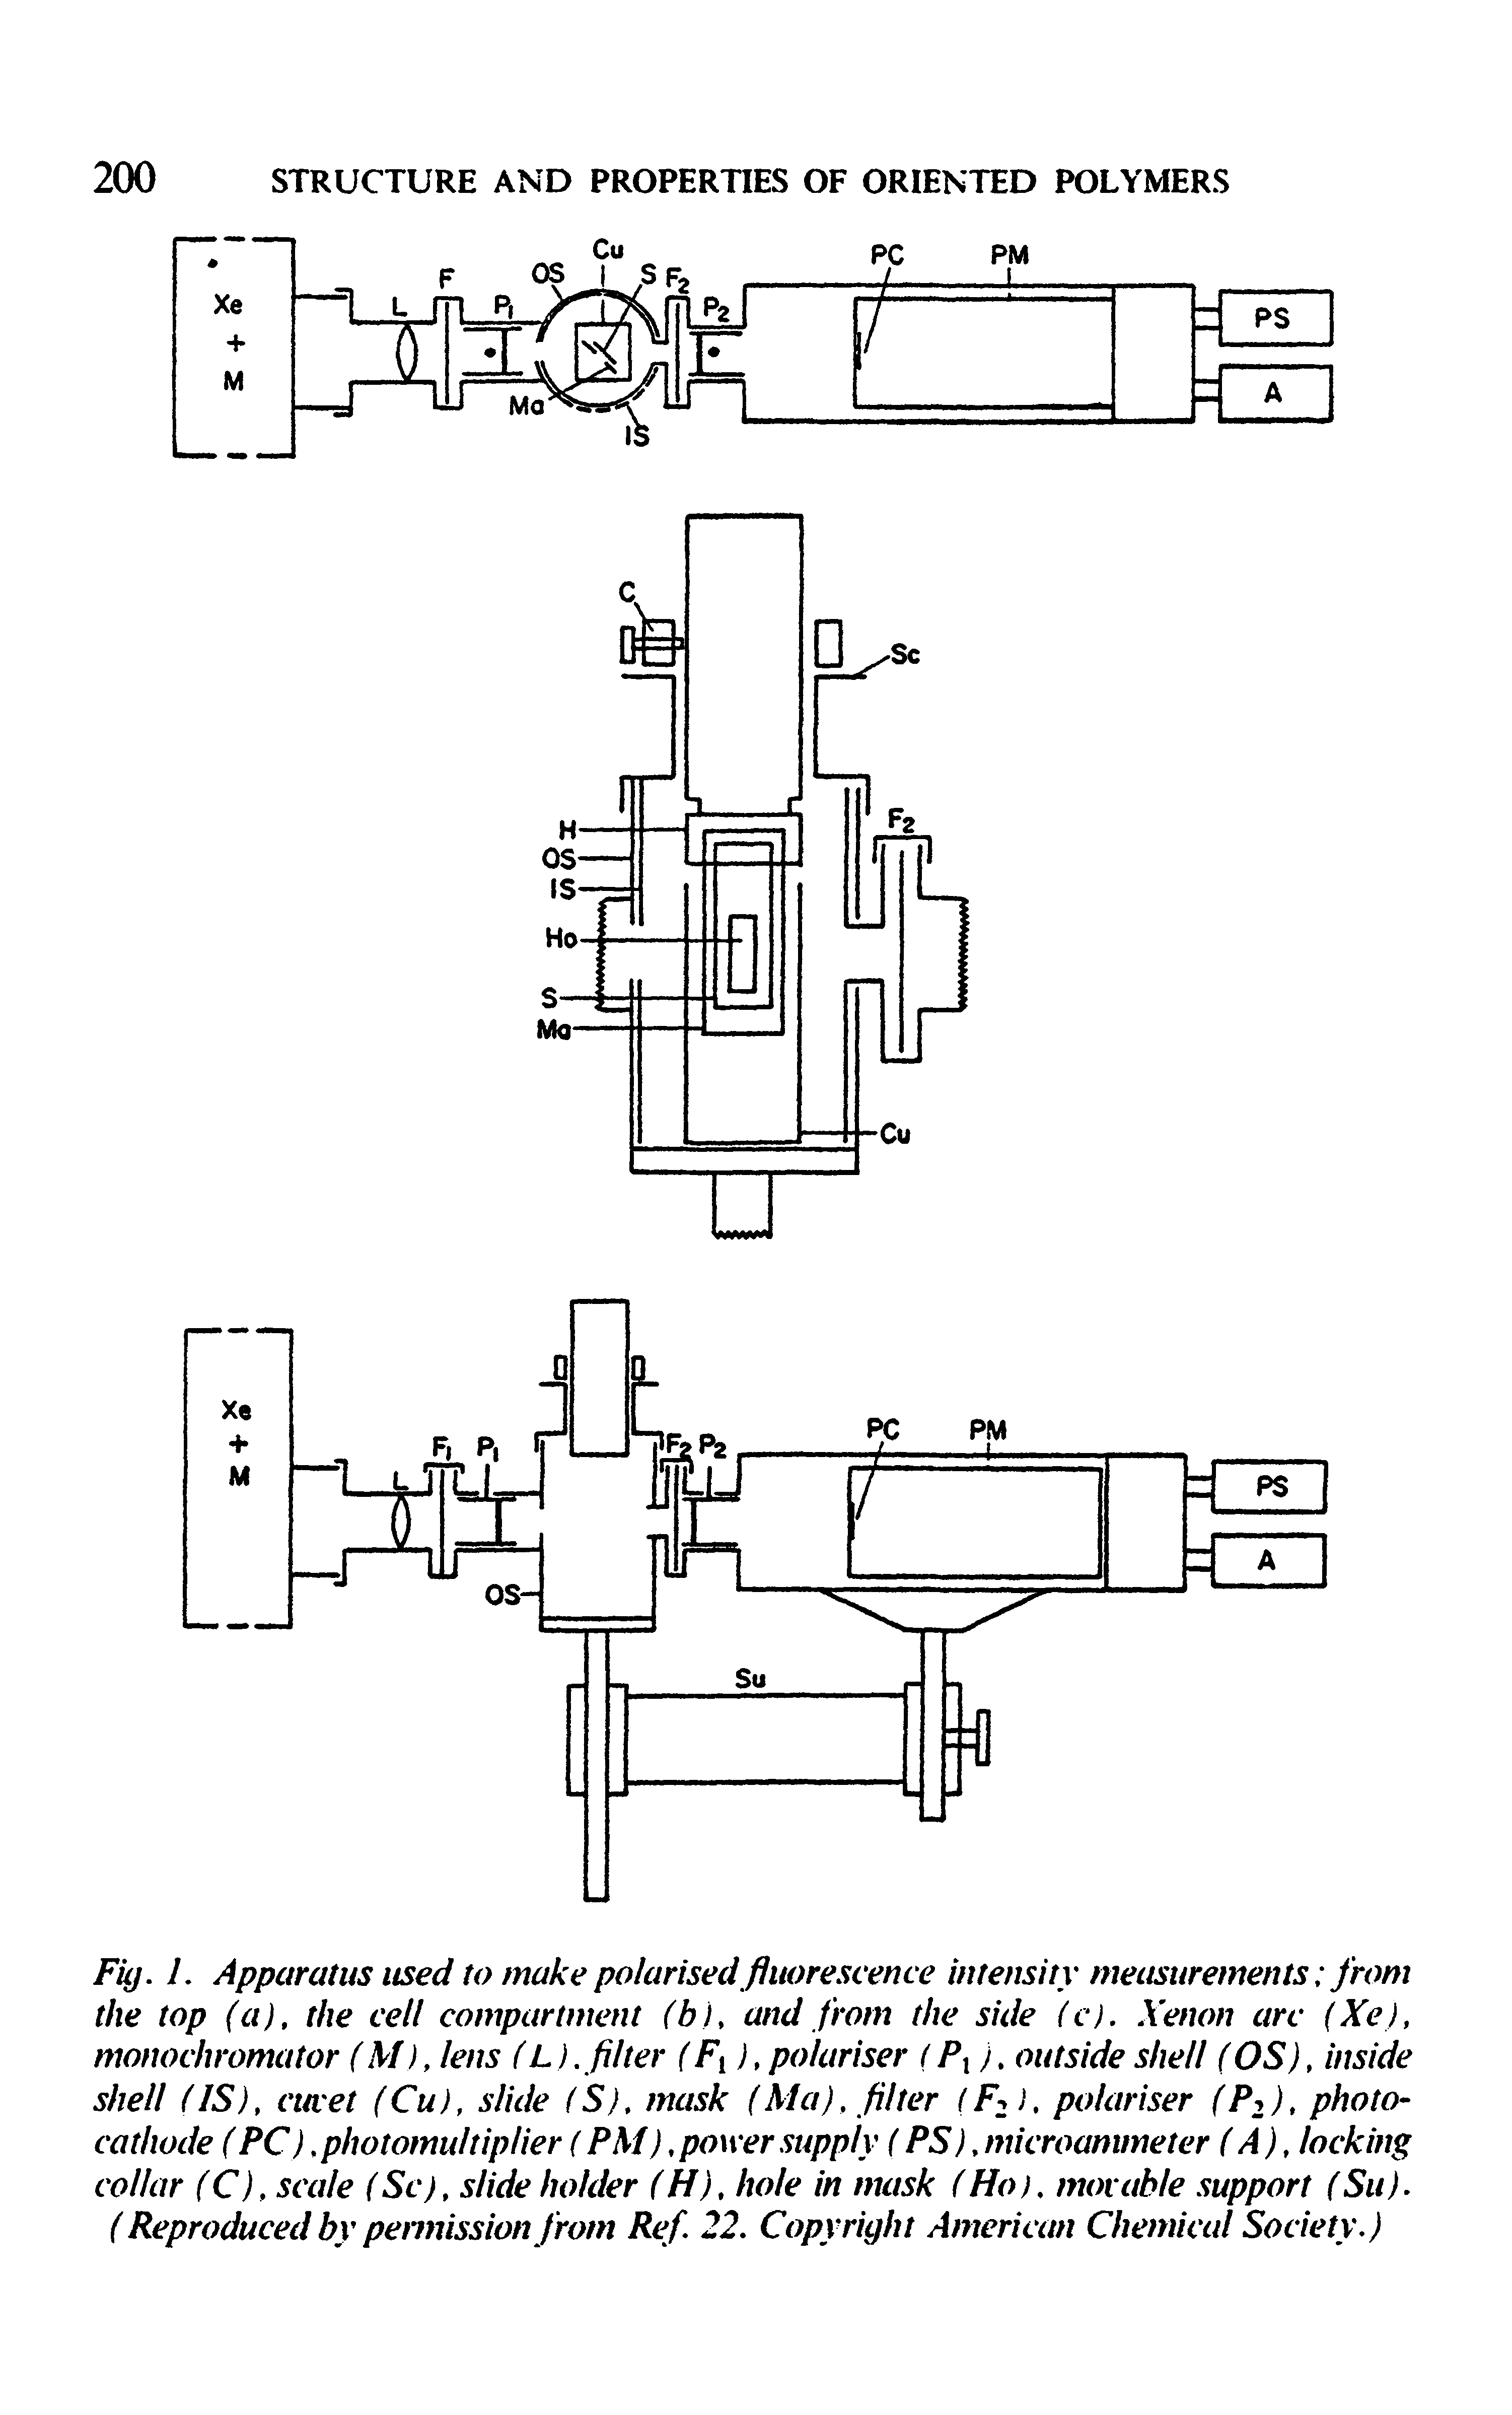 Fig. I. Apparatus used to make polarised fluorescence intensity measurements from the top (a), the cell compartment (bl, and from the side (c). Xenon arc (Xe), monochromator (M), lens (L). filter (Fi), polariser (Pi), outside shell (OS), inside shell (IS), ciaet (Cu), slide (S), mask (Ma), filter (F2K polariser (Pi), photo-cathode (PC). photomultiplier (PM), power supply (PS), microammeter (A), locking collar (C), scale (Sc), slide holder (H), hole in mask (Ho), movable support (Su).